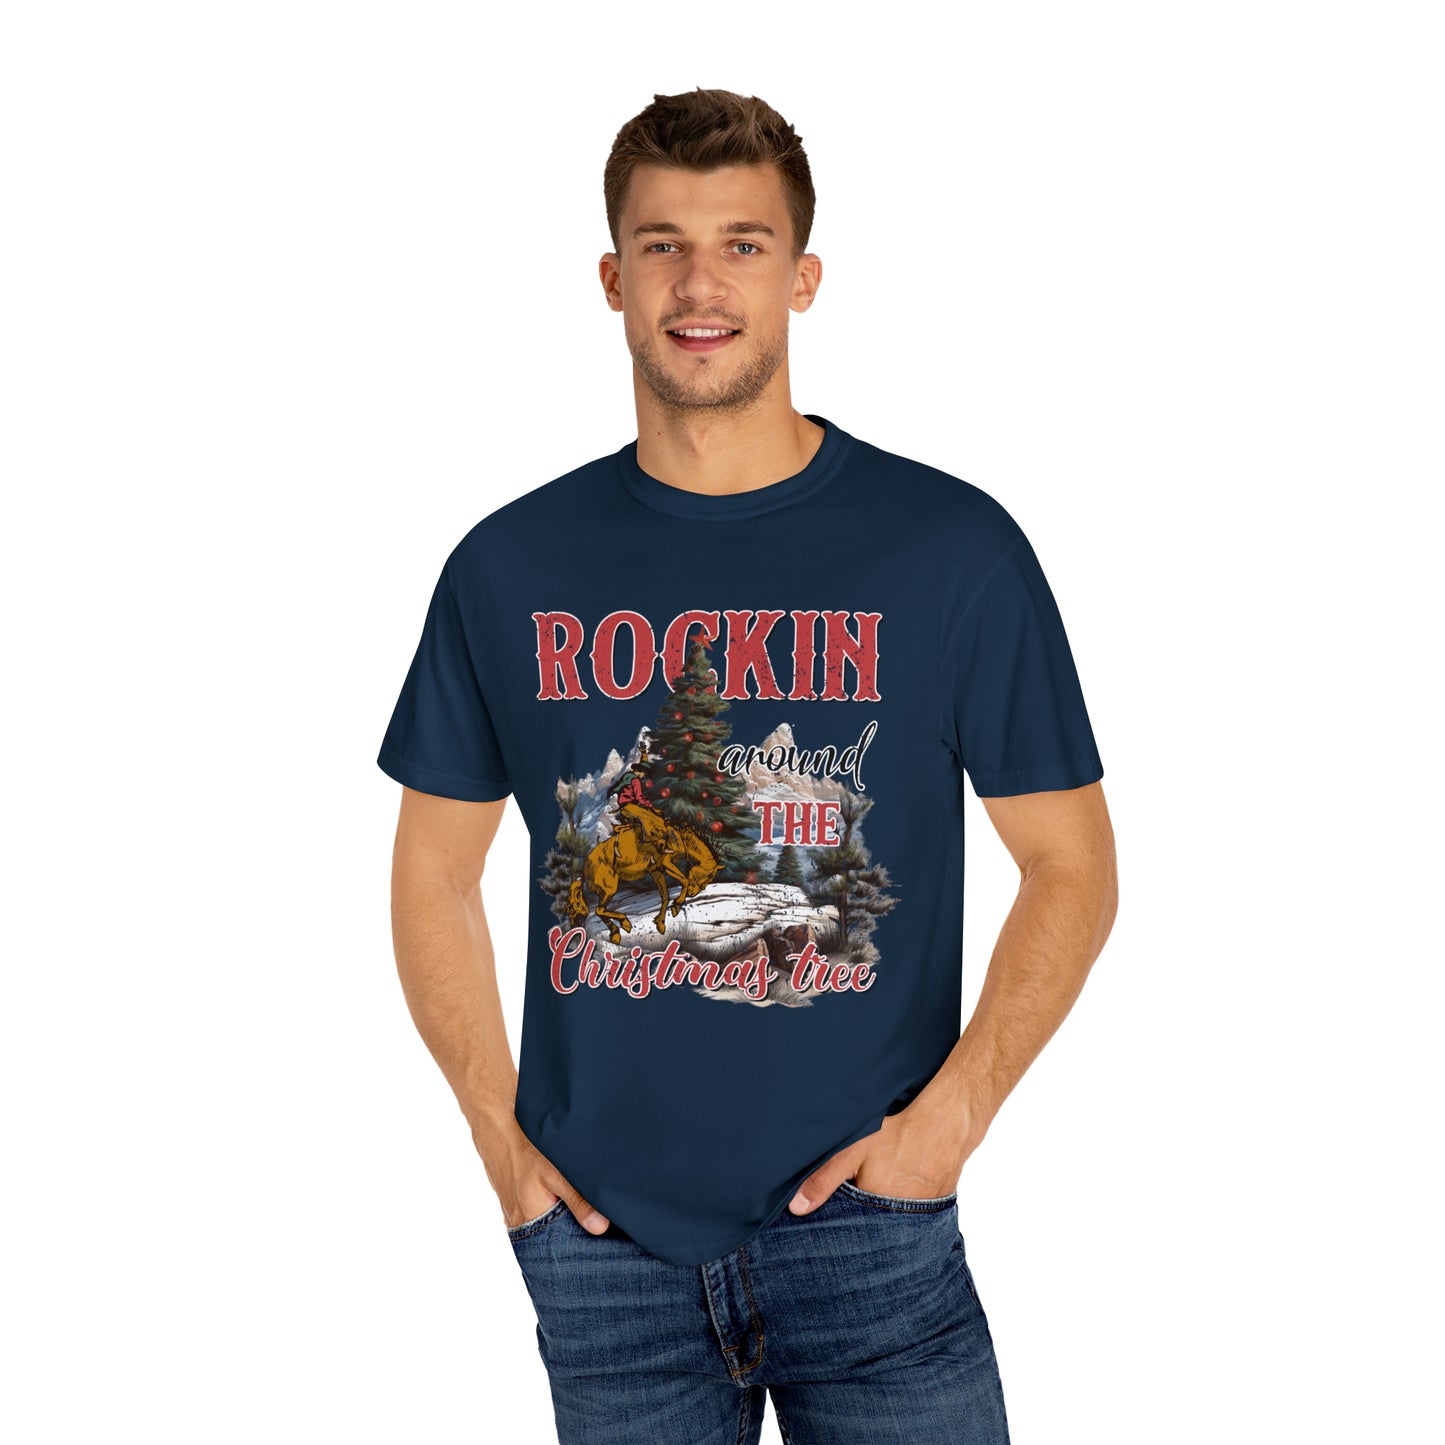 Cowboy Rockin' Around The Christmas Shirt, Cowgirl Xmas T-Shirt, Retro Country Holiday Tee, Western Rodeo Christmas TShirt Gift For Her - Teez Closet